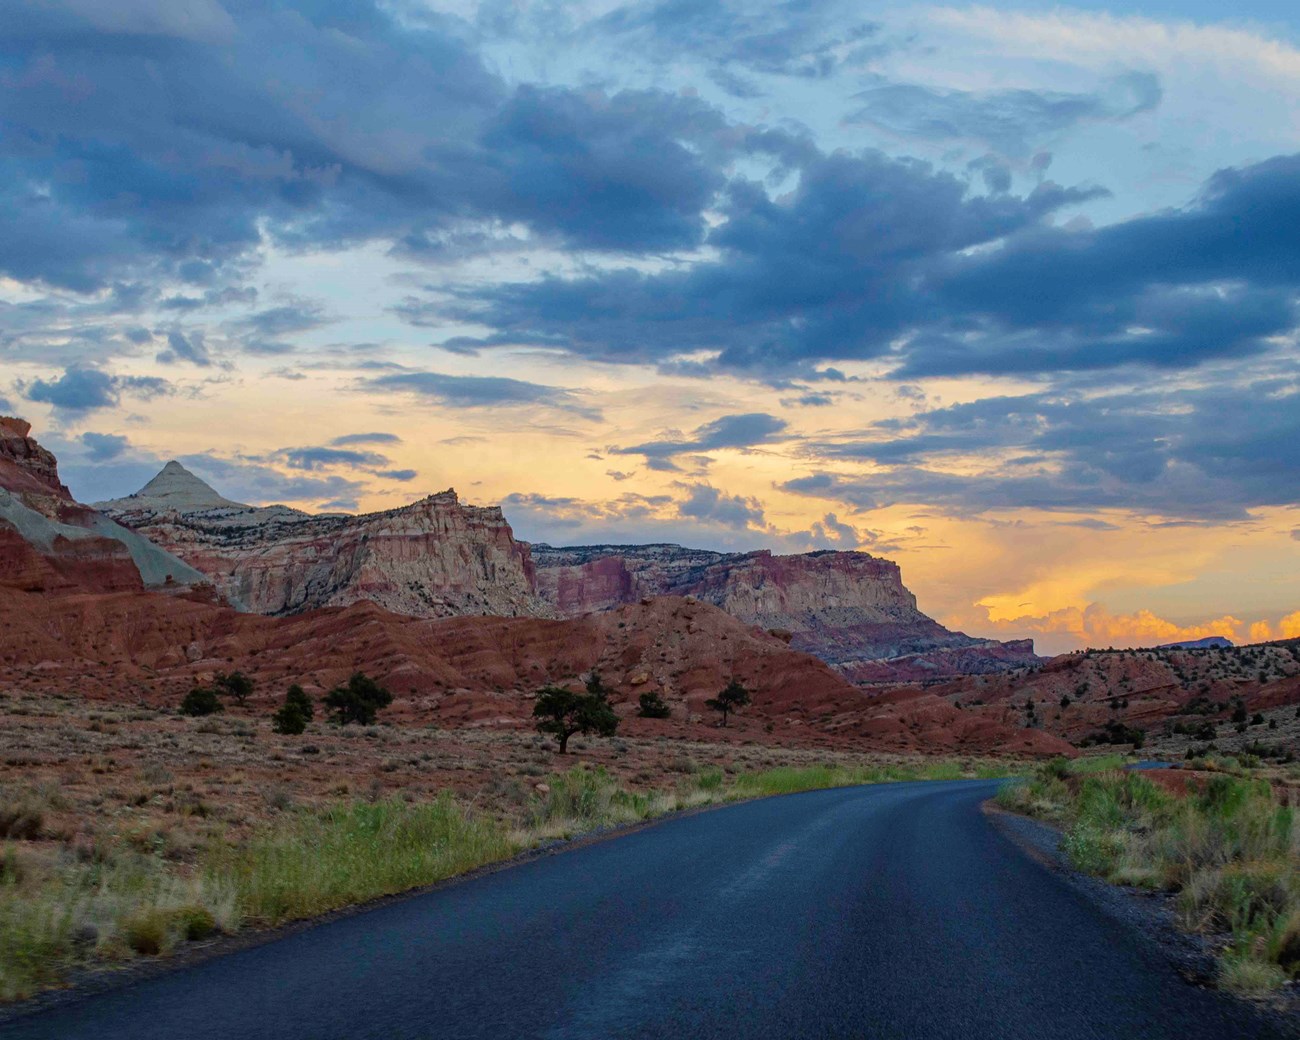 A paved road against a landscape of red cliffs and a cloudy sky.